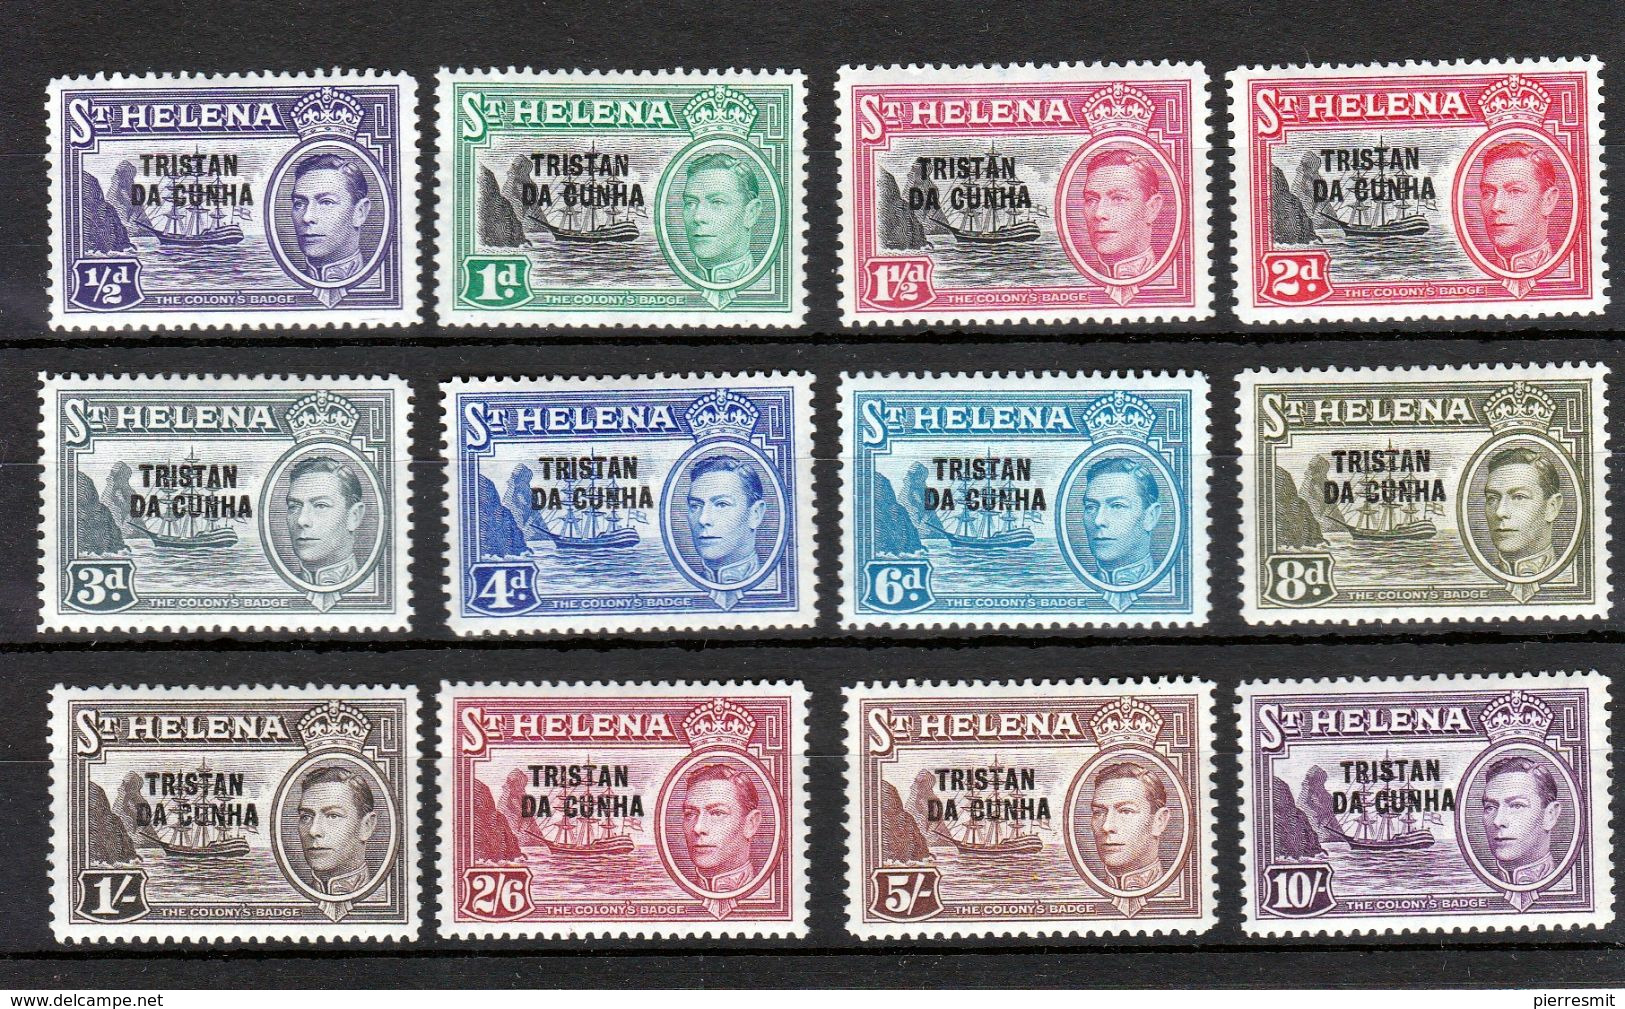 Tristan Da Cunha - Mint With Very Faint Traces Of Hinge Remains, Stamps Of St Helena Optd "Tristan Da Cunha" - Tristan Da Cunha